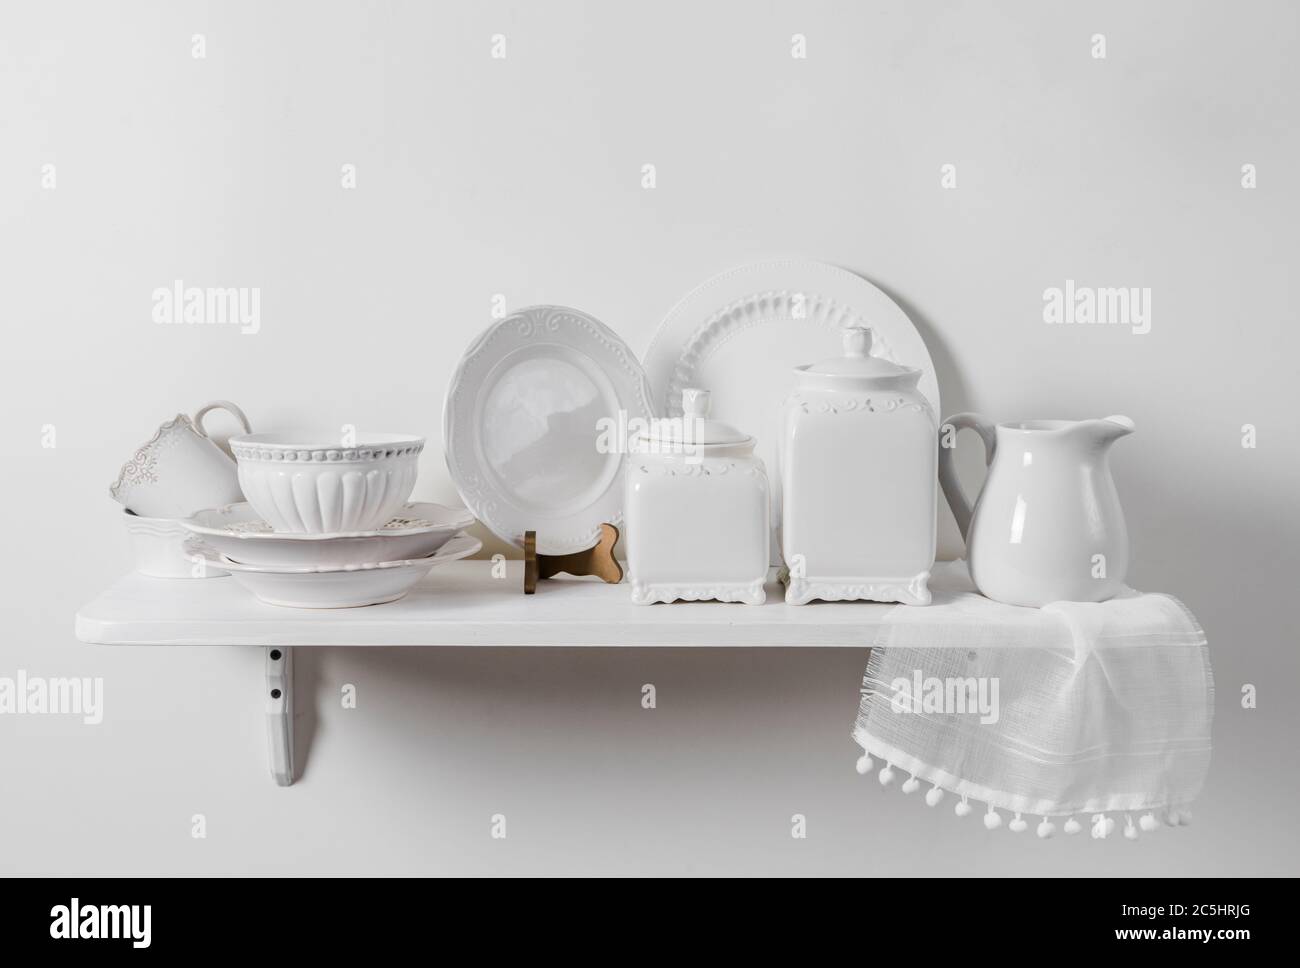 Composition of white wood hanging shelf on wall with country home tableware set on display. Romantic pattern plates, ceramic storage box containers. Stock Photo